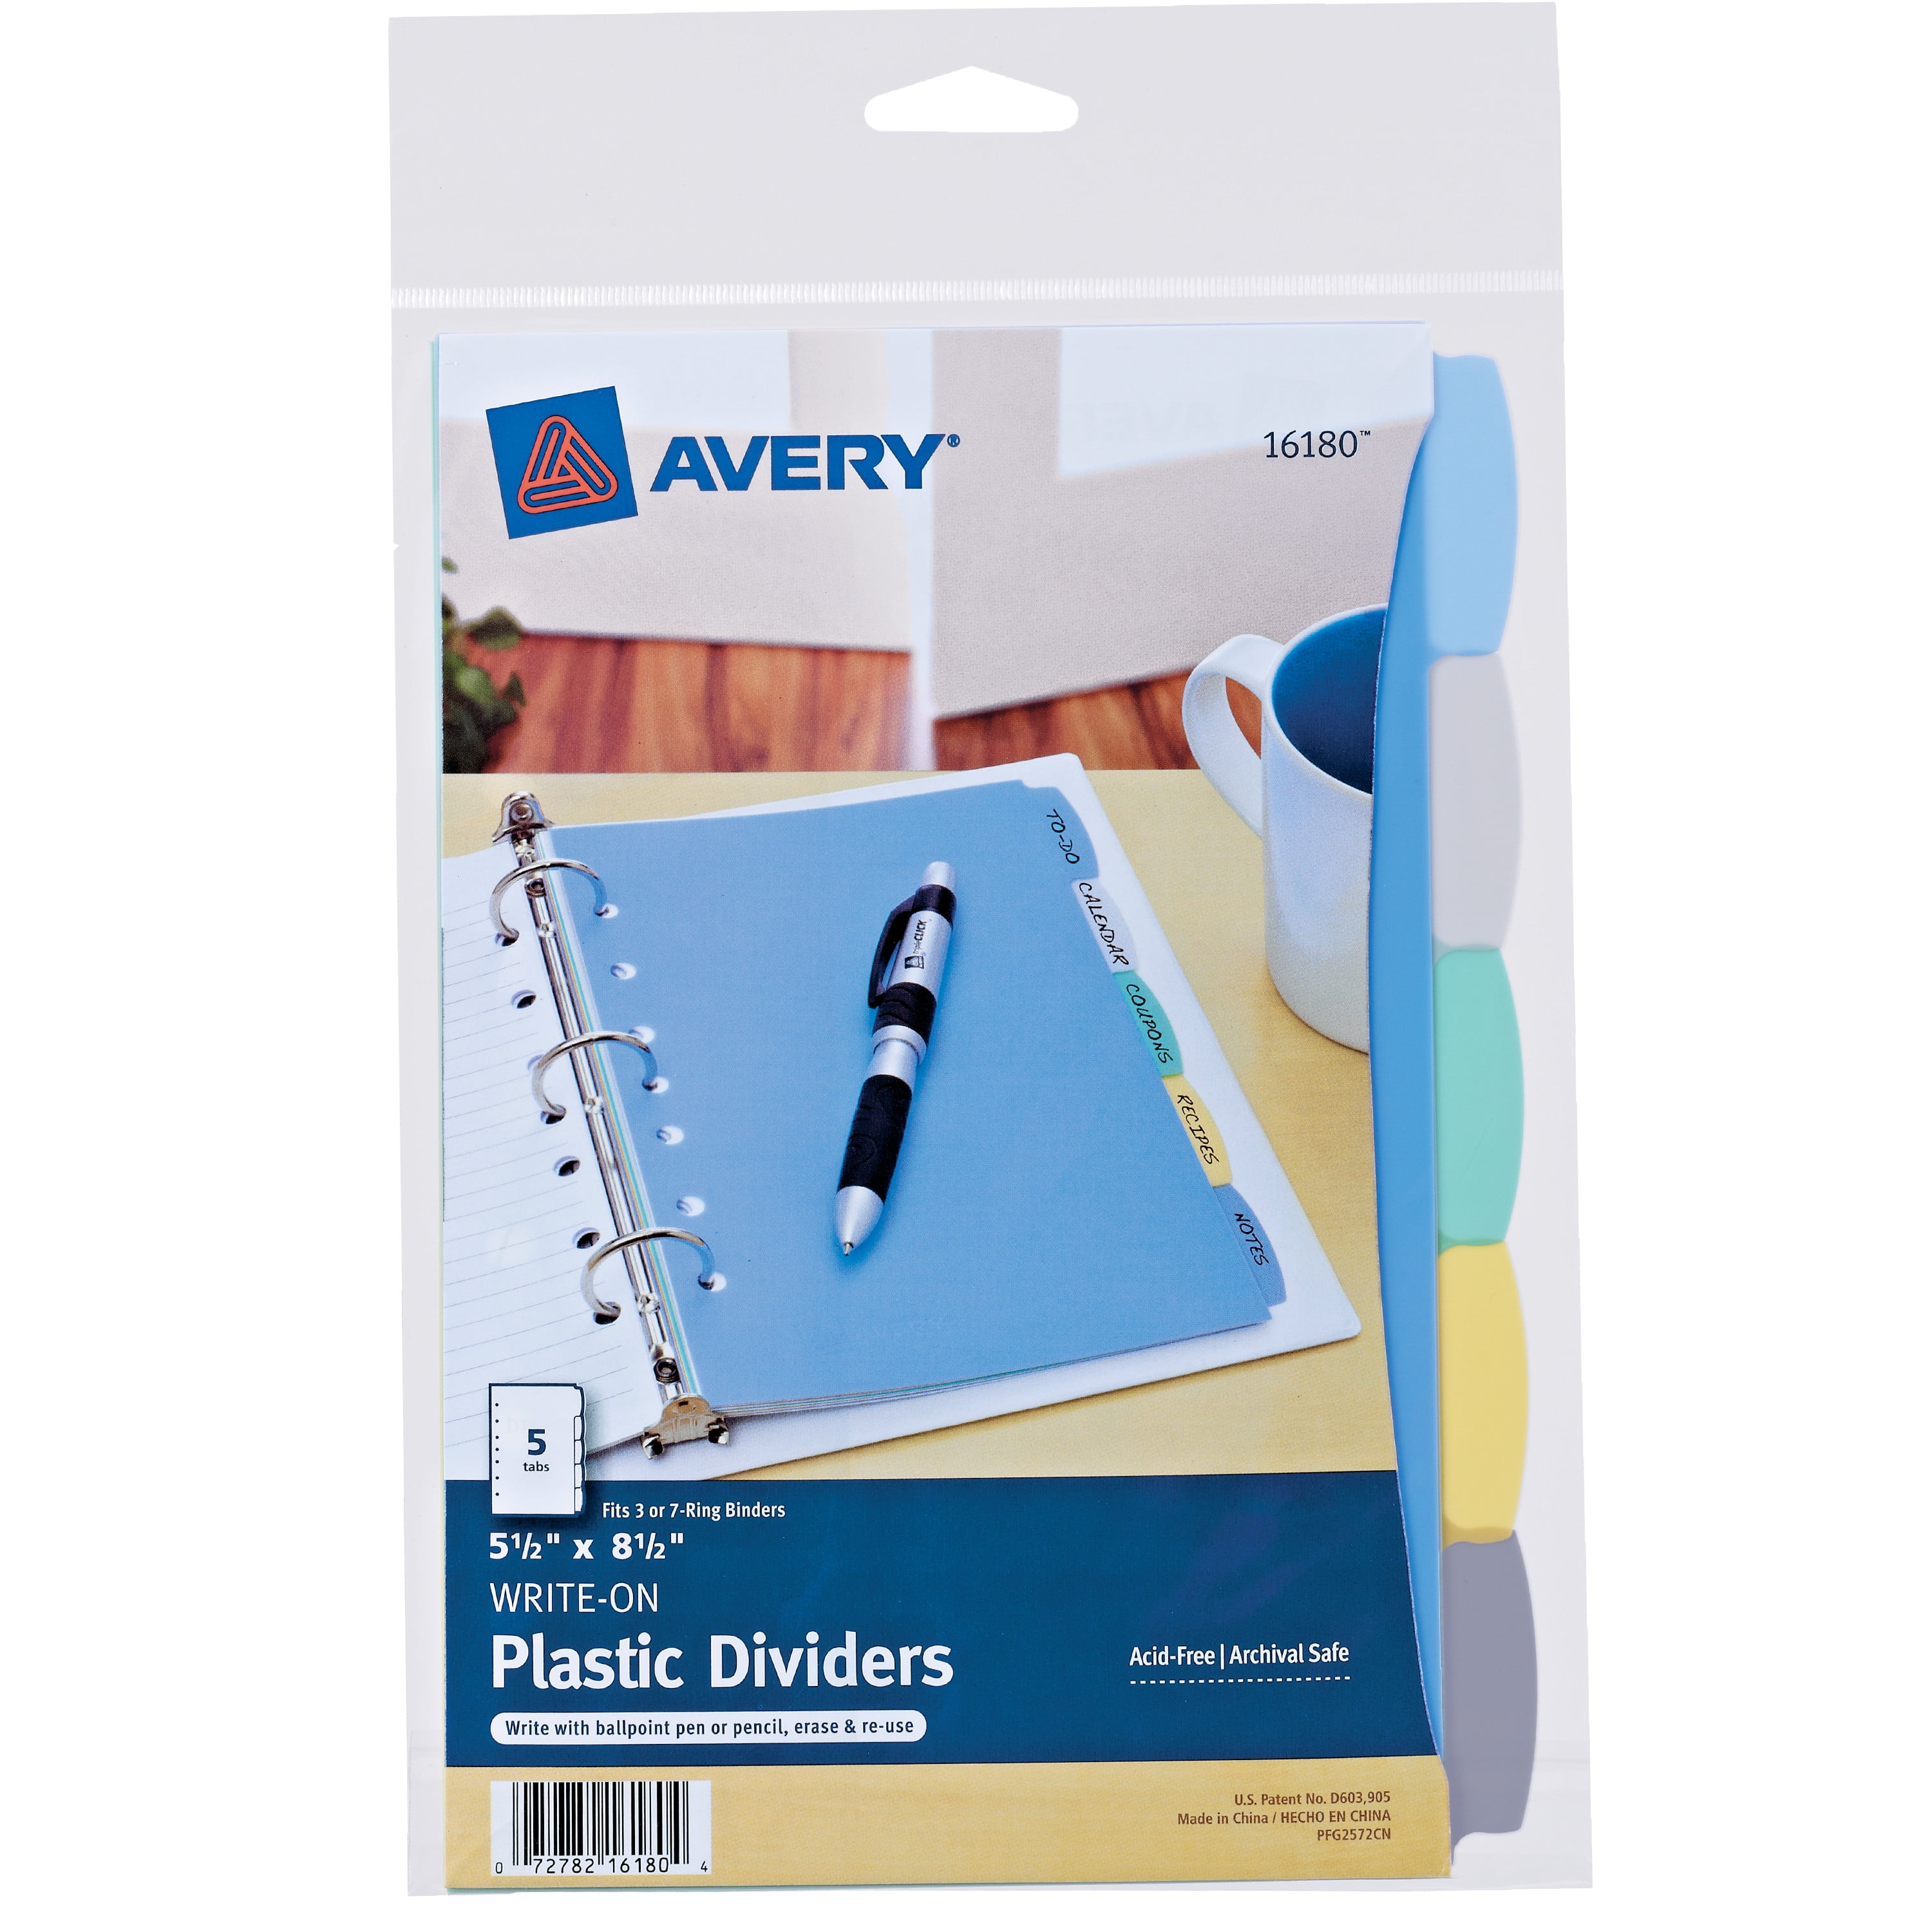 AVERY MINI 3-Ring Binder 5.5x8.5 Inch Lot PACK Office Duty School 1 2 Round book 